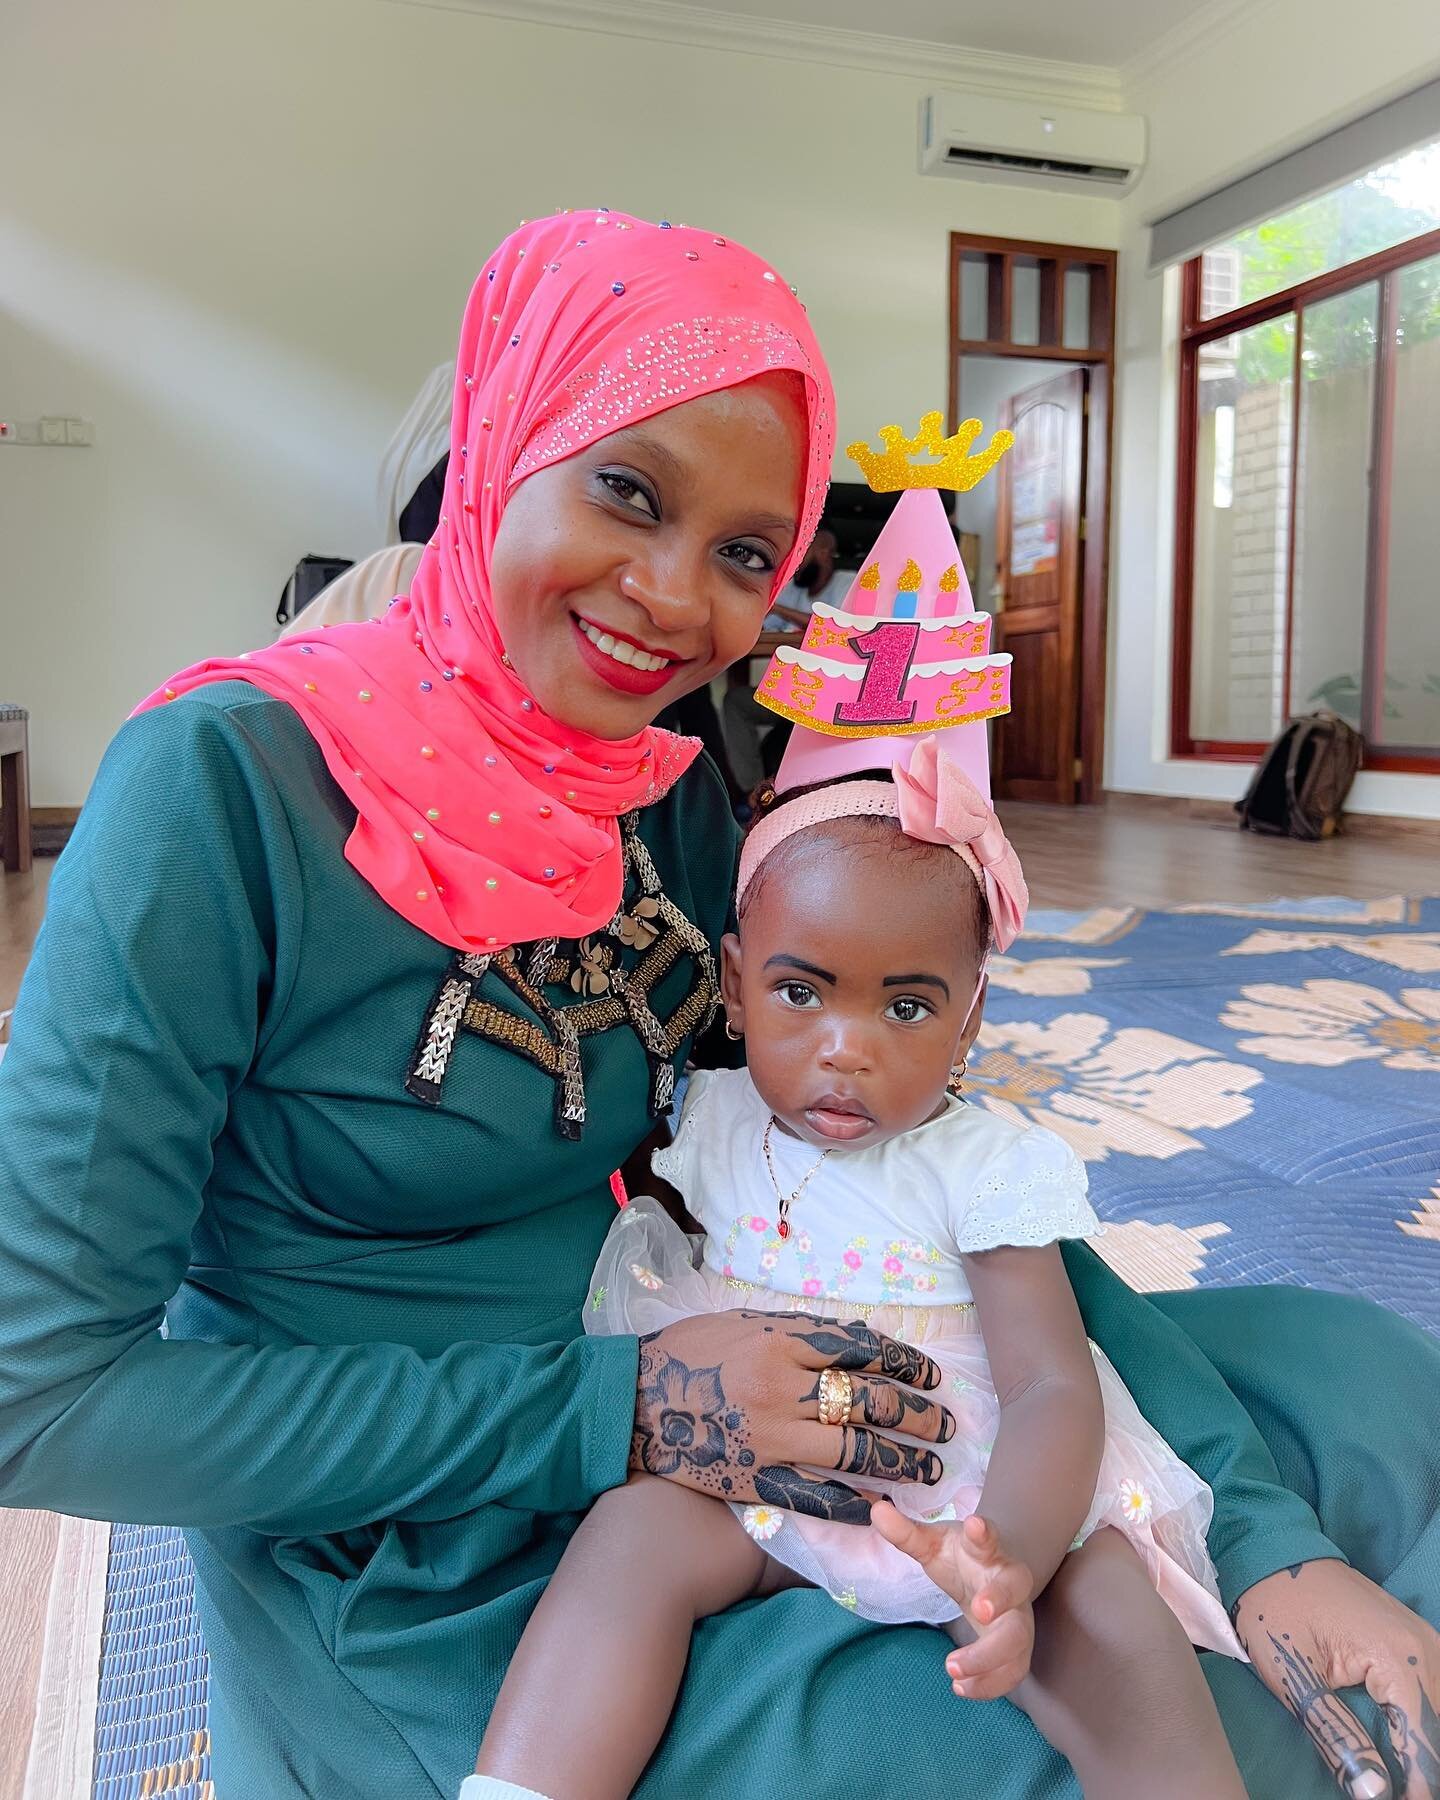 How it started vs. how it&rsquo;s going&hellip; scroll ⬅️ to see Jokha and little Dilshad right after birth. 

Jokha started attending WAJAMAMA&rsquo;s &lsquo;Uzazi Bora Pamoja&rsquo; at the beginning of her third trimester. At that time, her pregnan